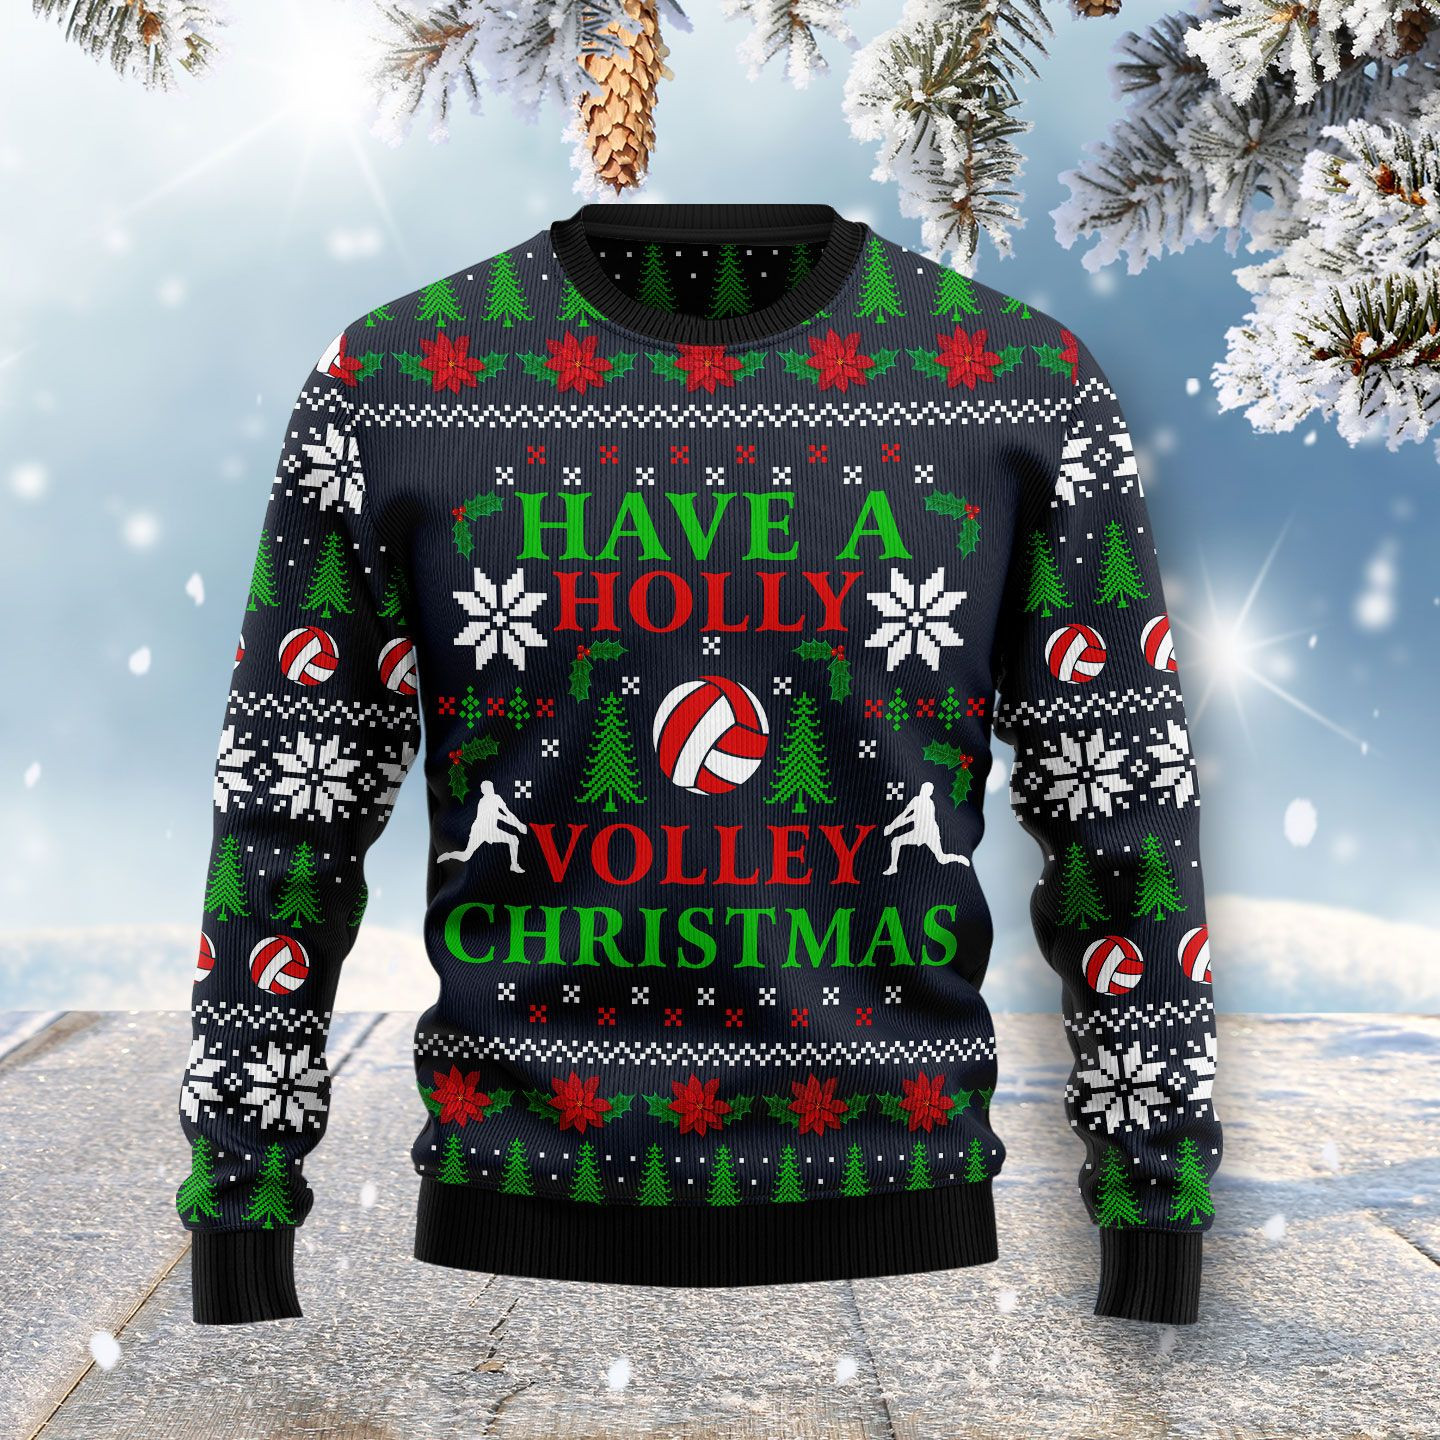 Holly Volley Volleyball Christmas Ugly Christmas Sweater